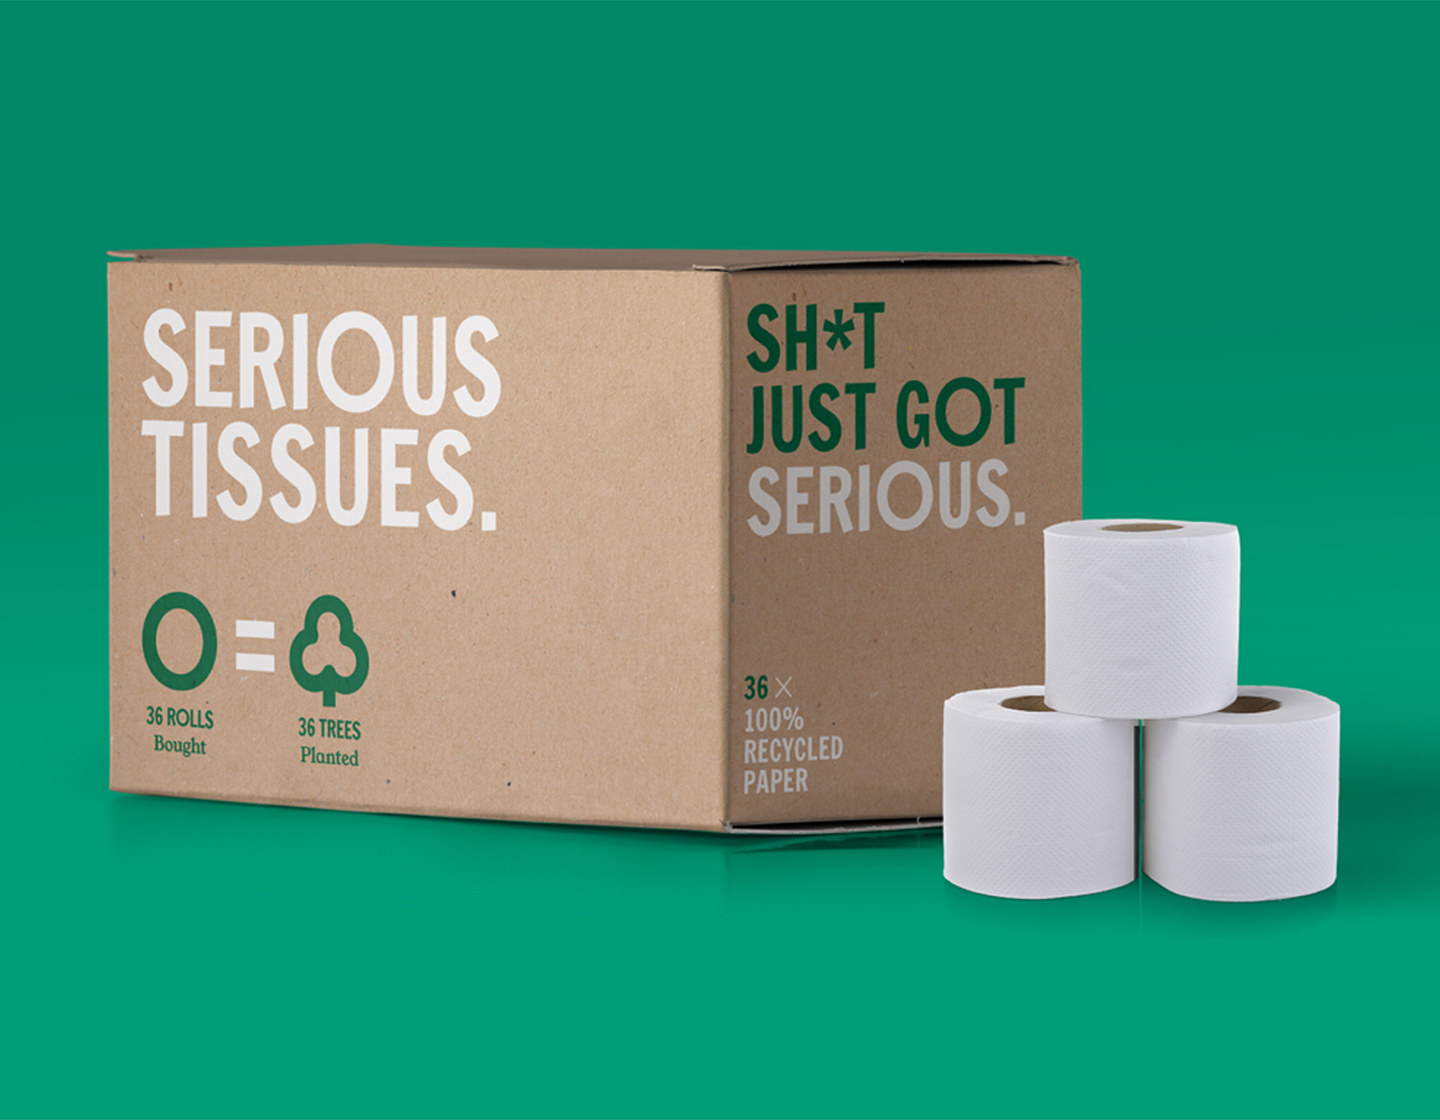 Serious Tissues Brand Page Image 1 - 1440 x 1120